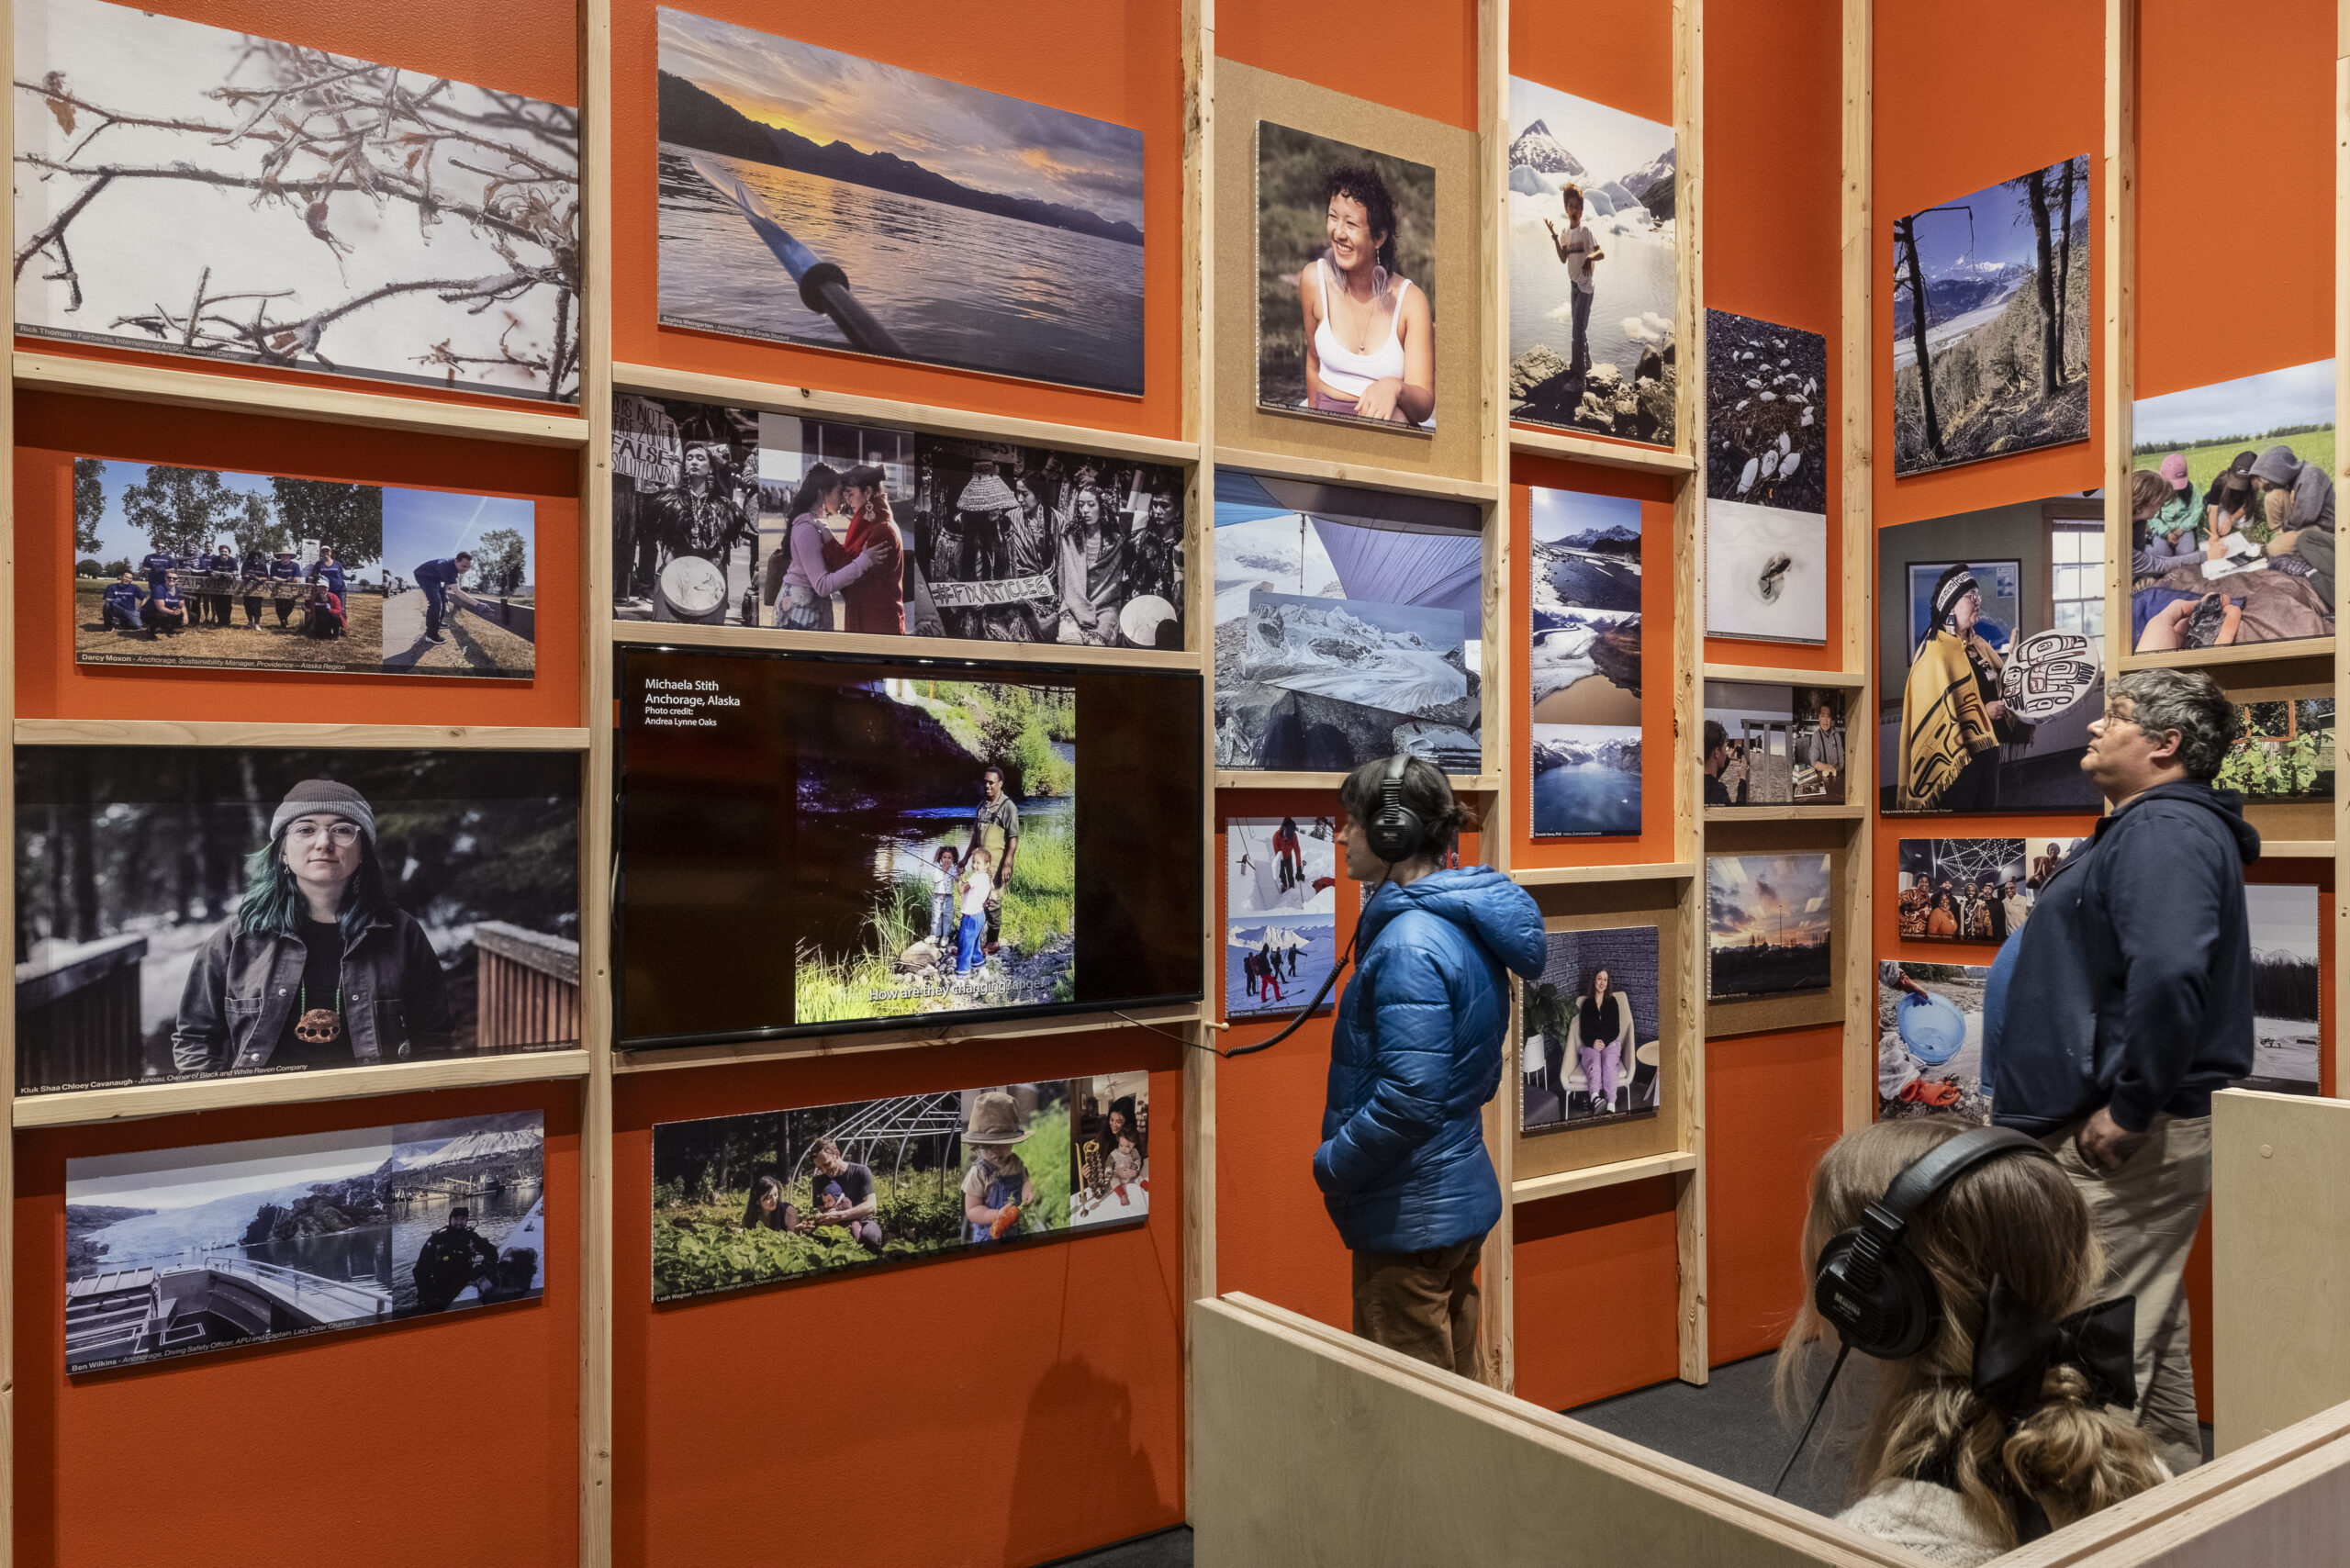 Museum-goers and listen to audio and look at a collection of photos on a red wall.